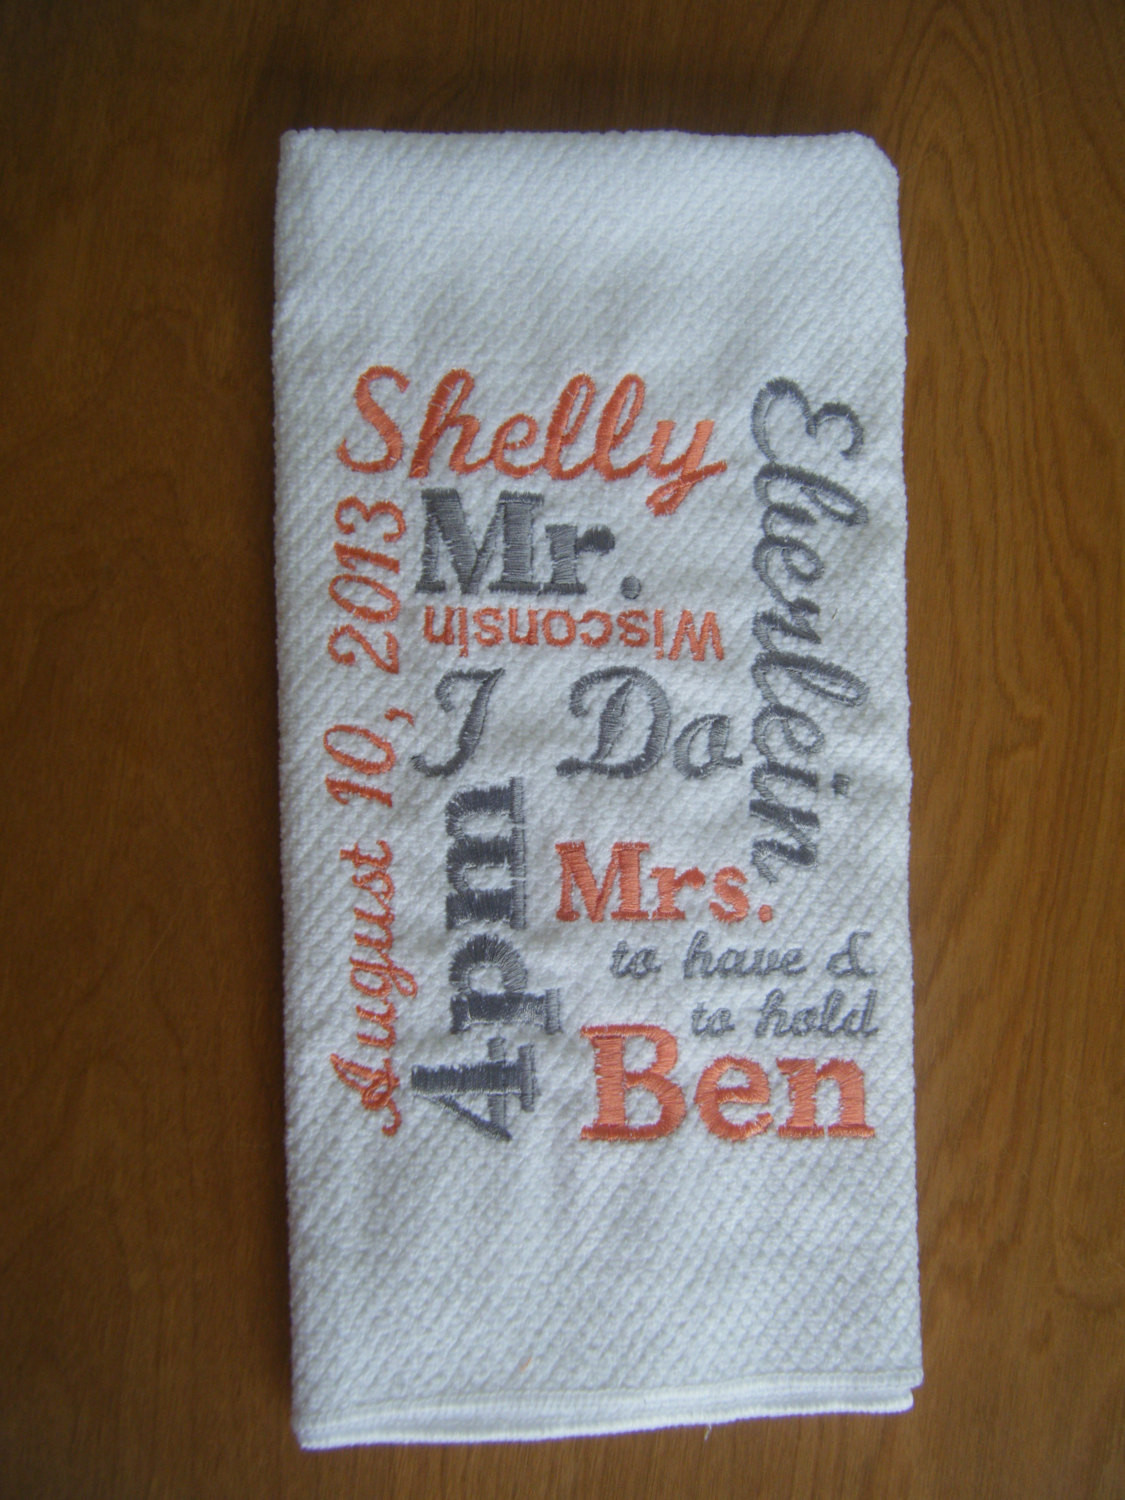 Wedding Embroidery Gift Ideas
 Personalized Kitchen Towel Wedding Gift Bridal Shower Gift